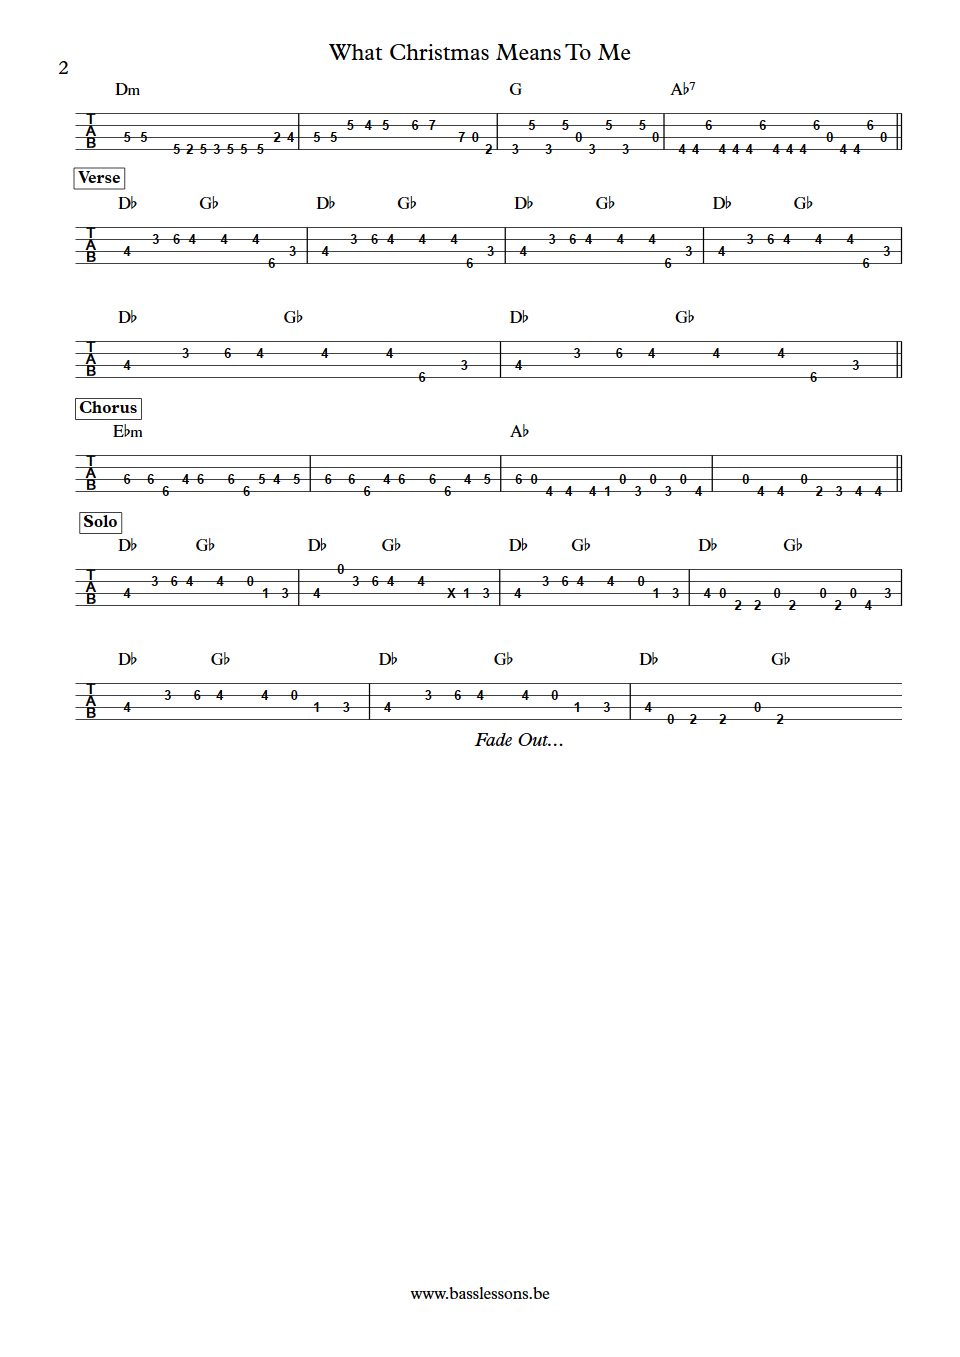 Stevie Wonder What Christmas means to me James Jamerson bass tab part 2